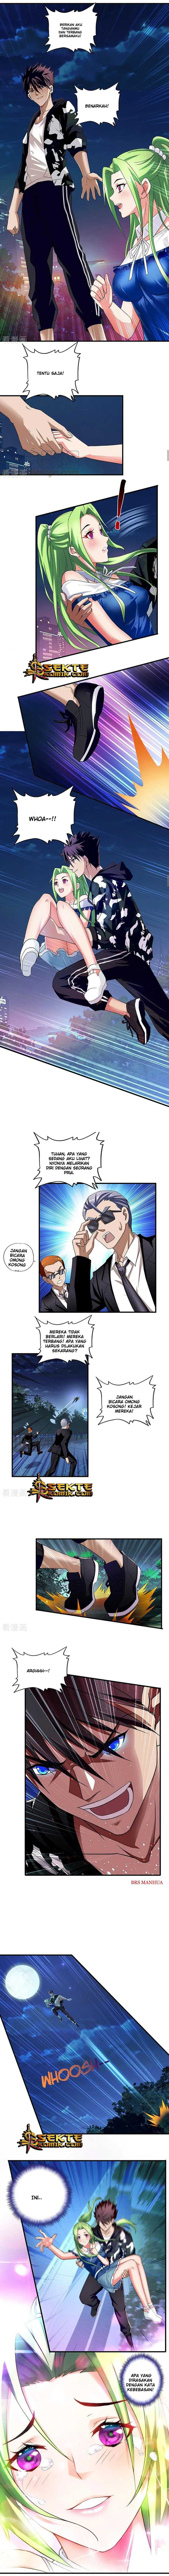 Super Soldier Chapter 3